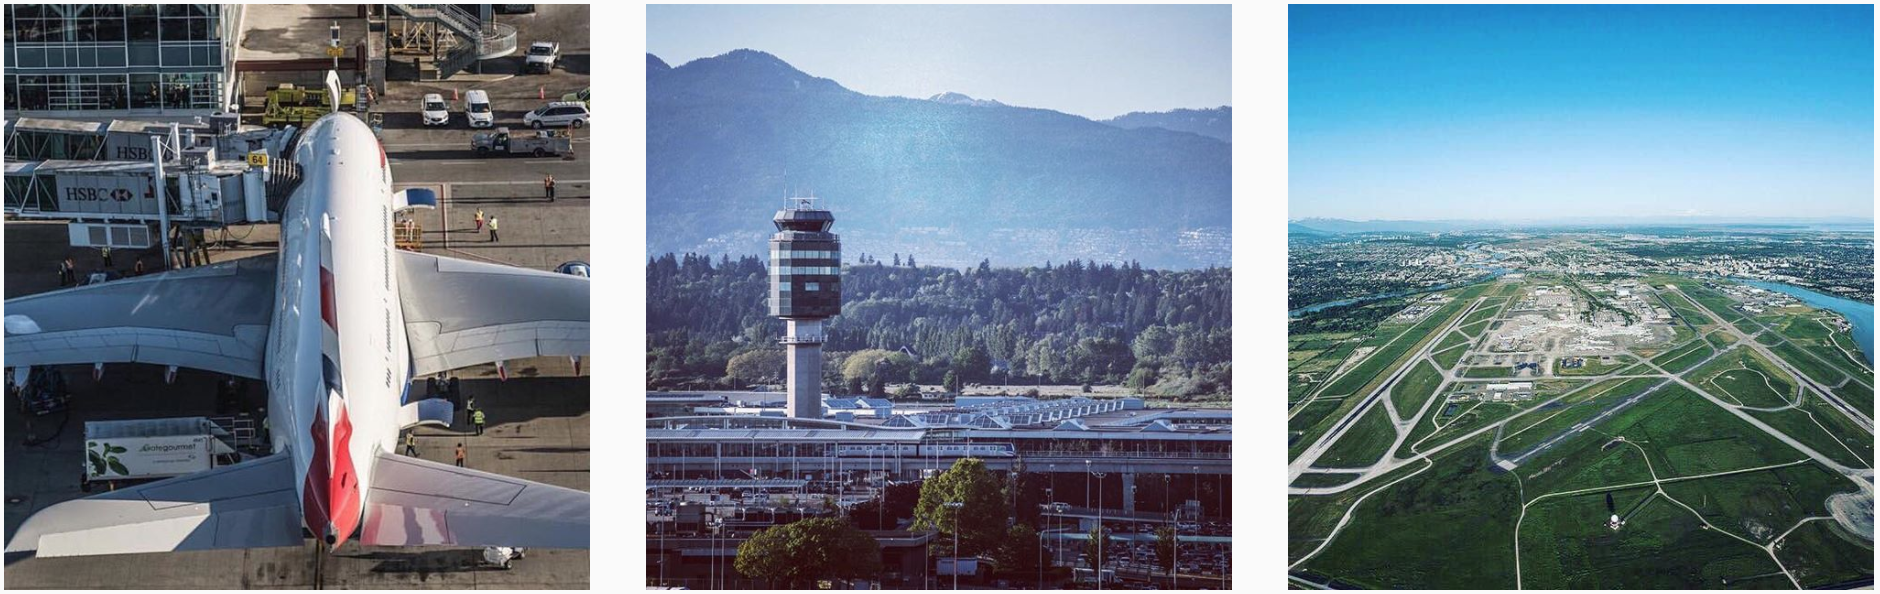 YVR-airport